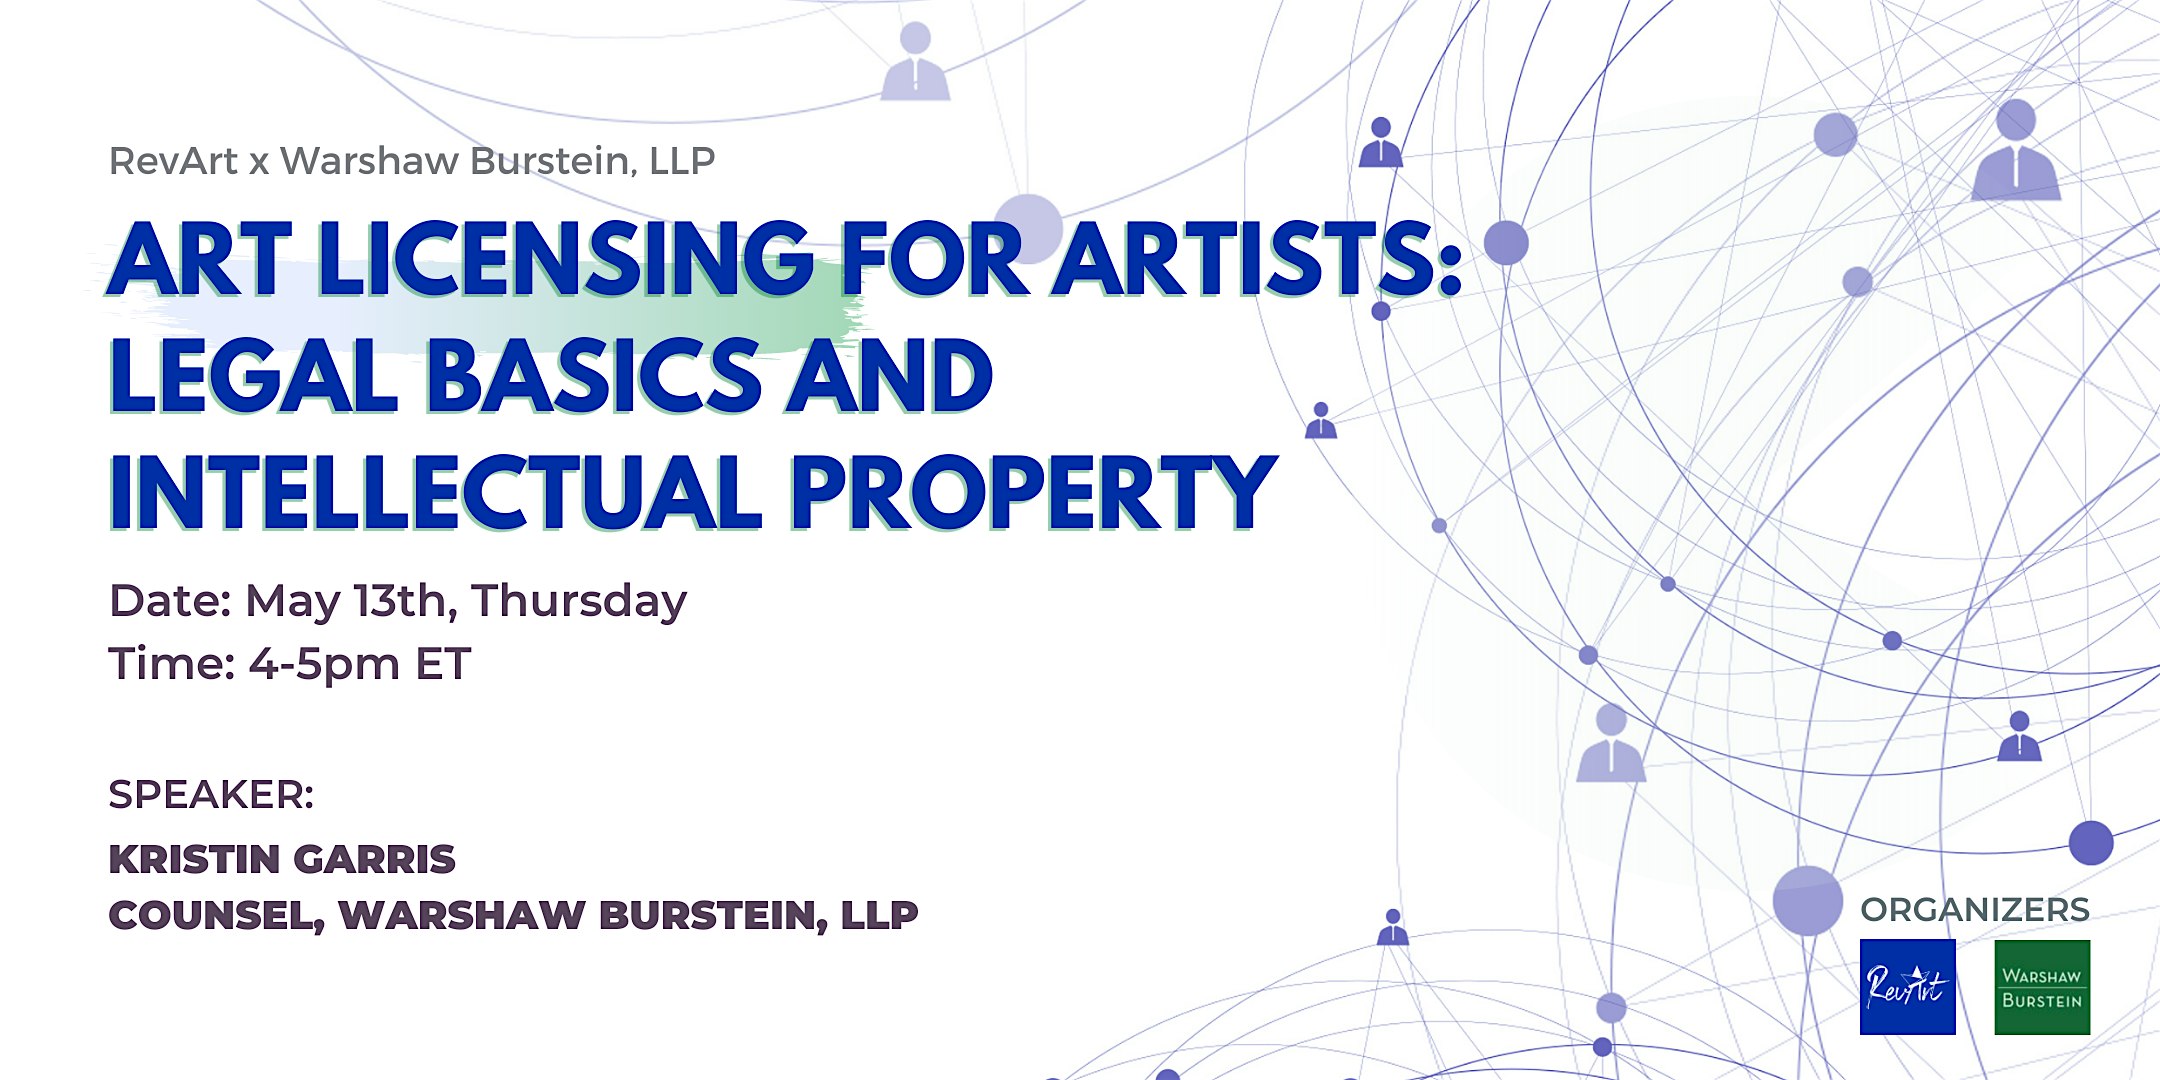 Art Licensing for Artists: Legal Basics and Intellectual Property